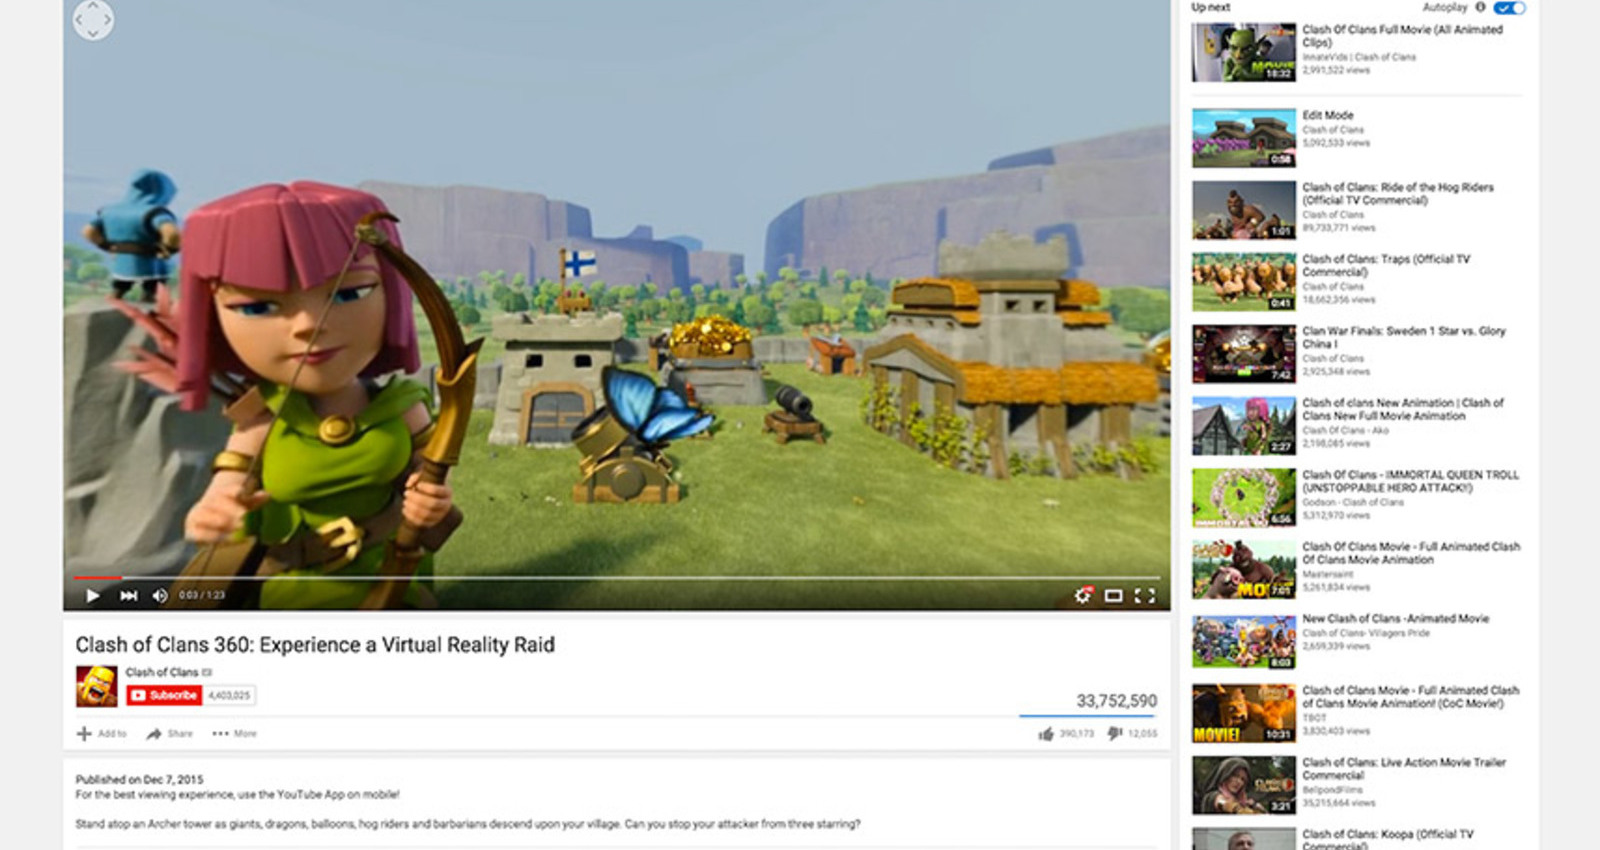 Clash of Clans - Virtual Reality